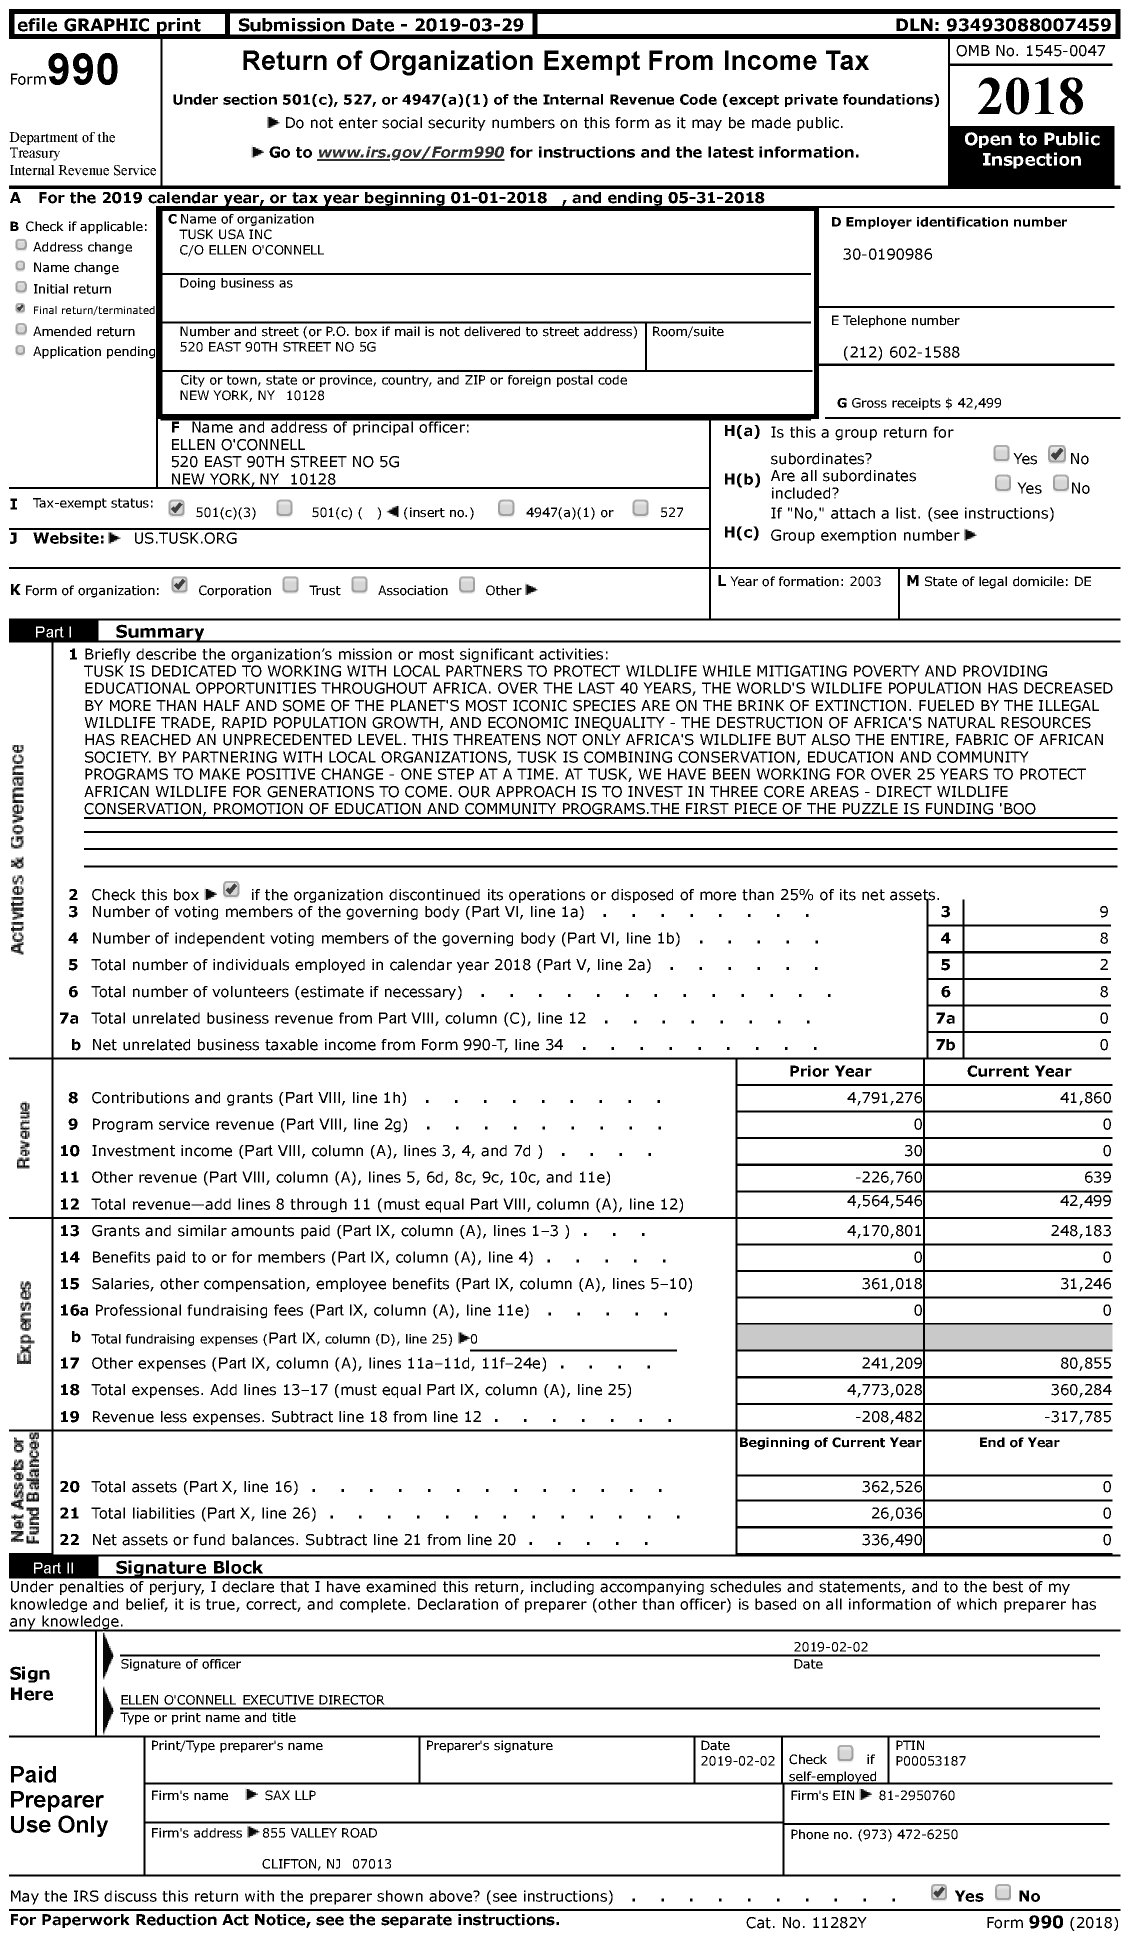 Image of first page of 2017 Form 990 for Tusk USA